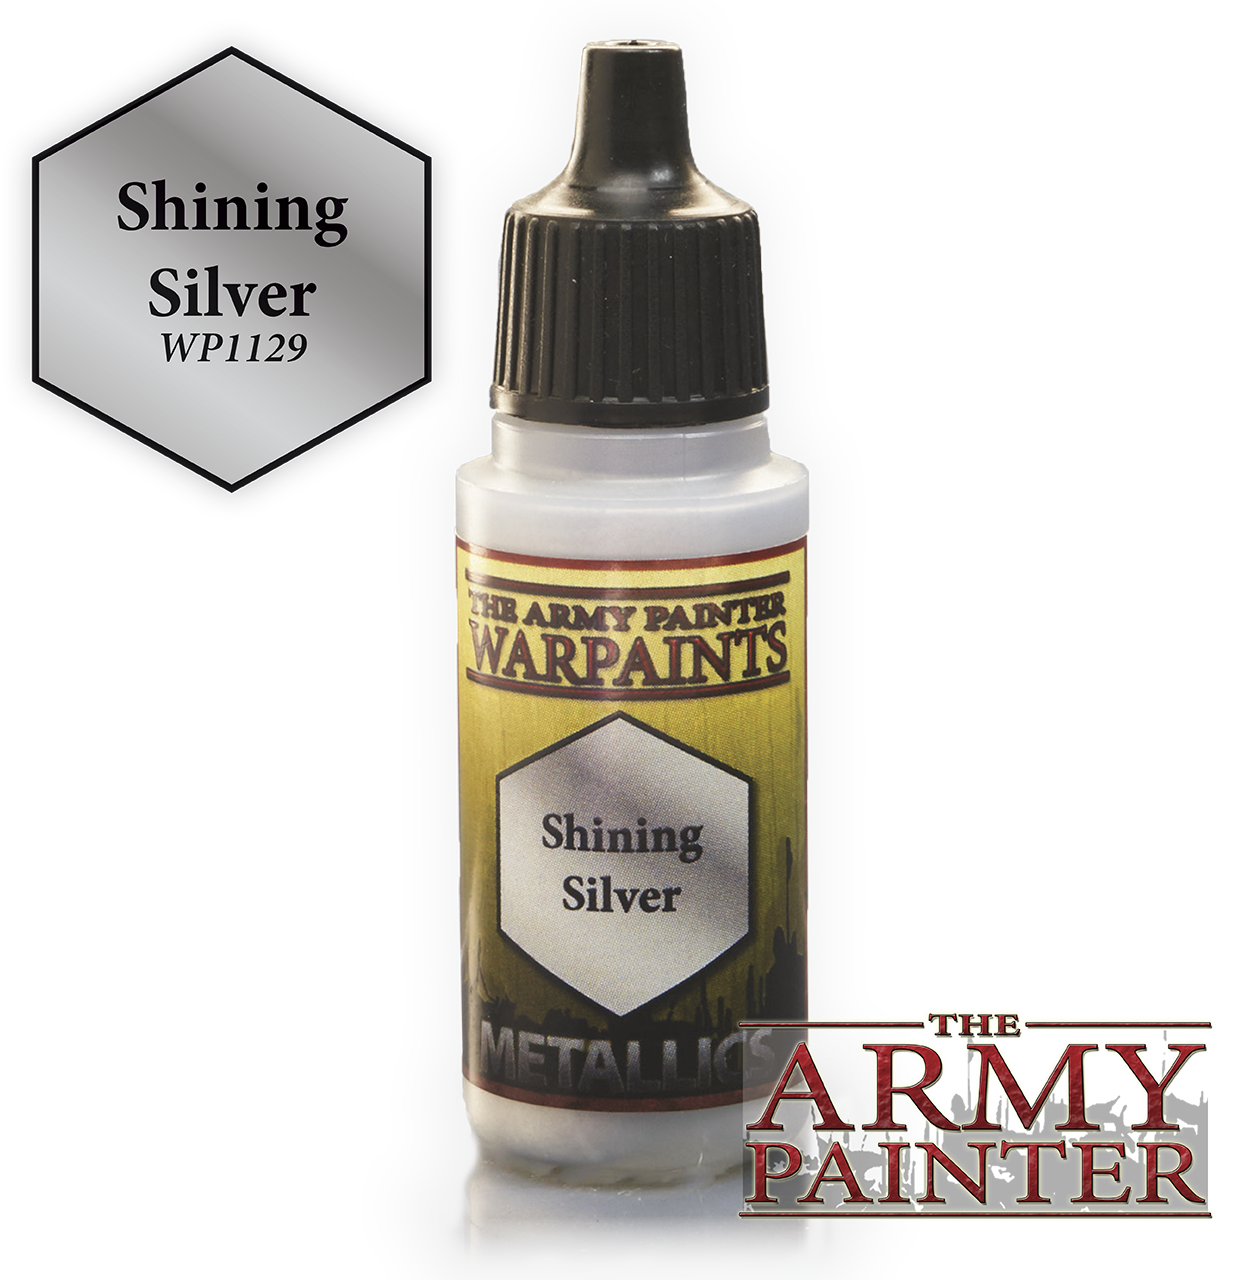 The ARMY PAINTER: Metallics Warpaints - Shining Silver | Tacoma Games